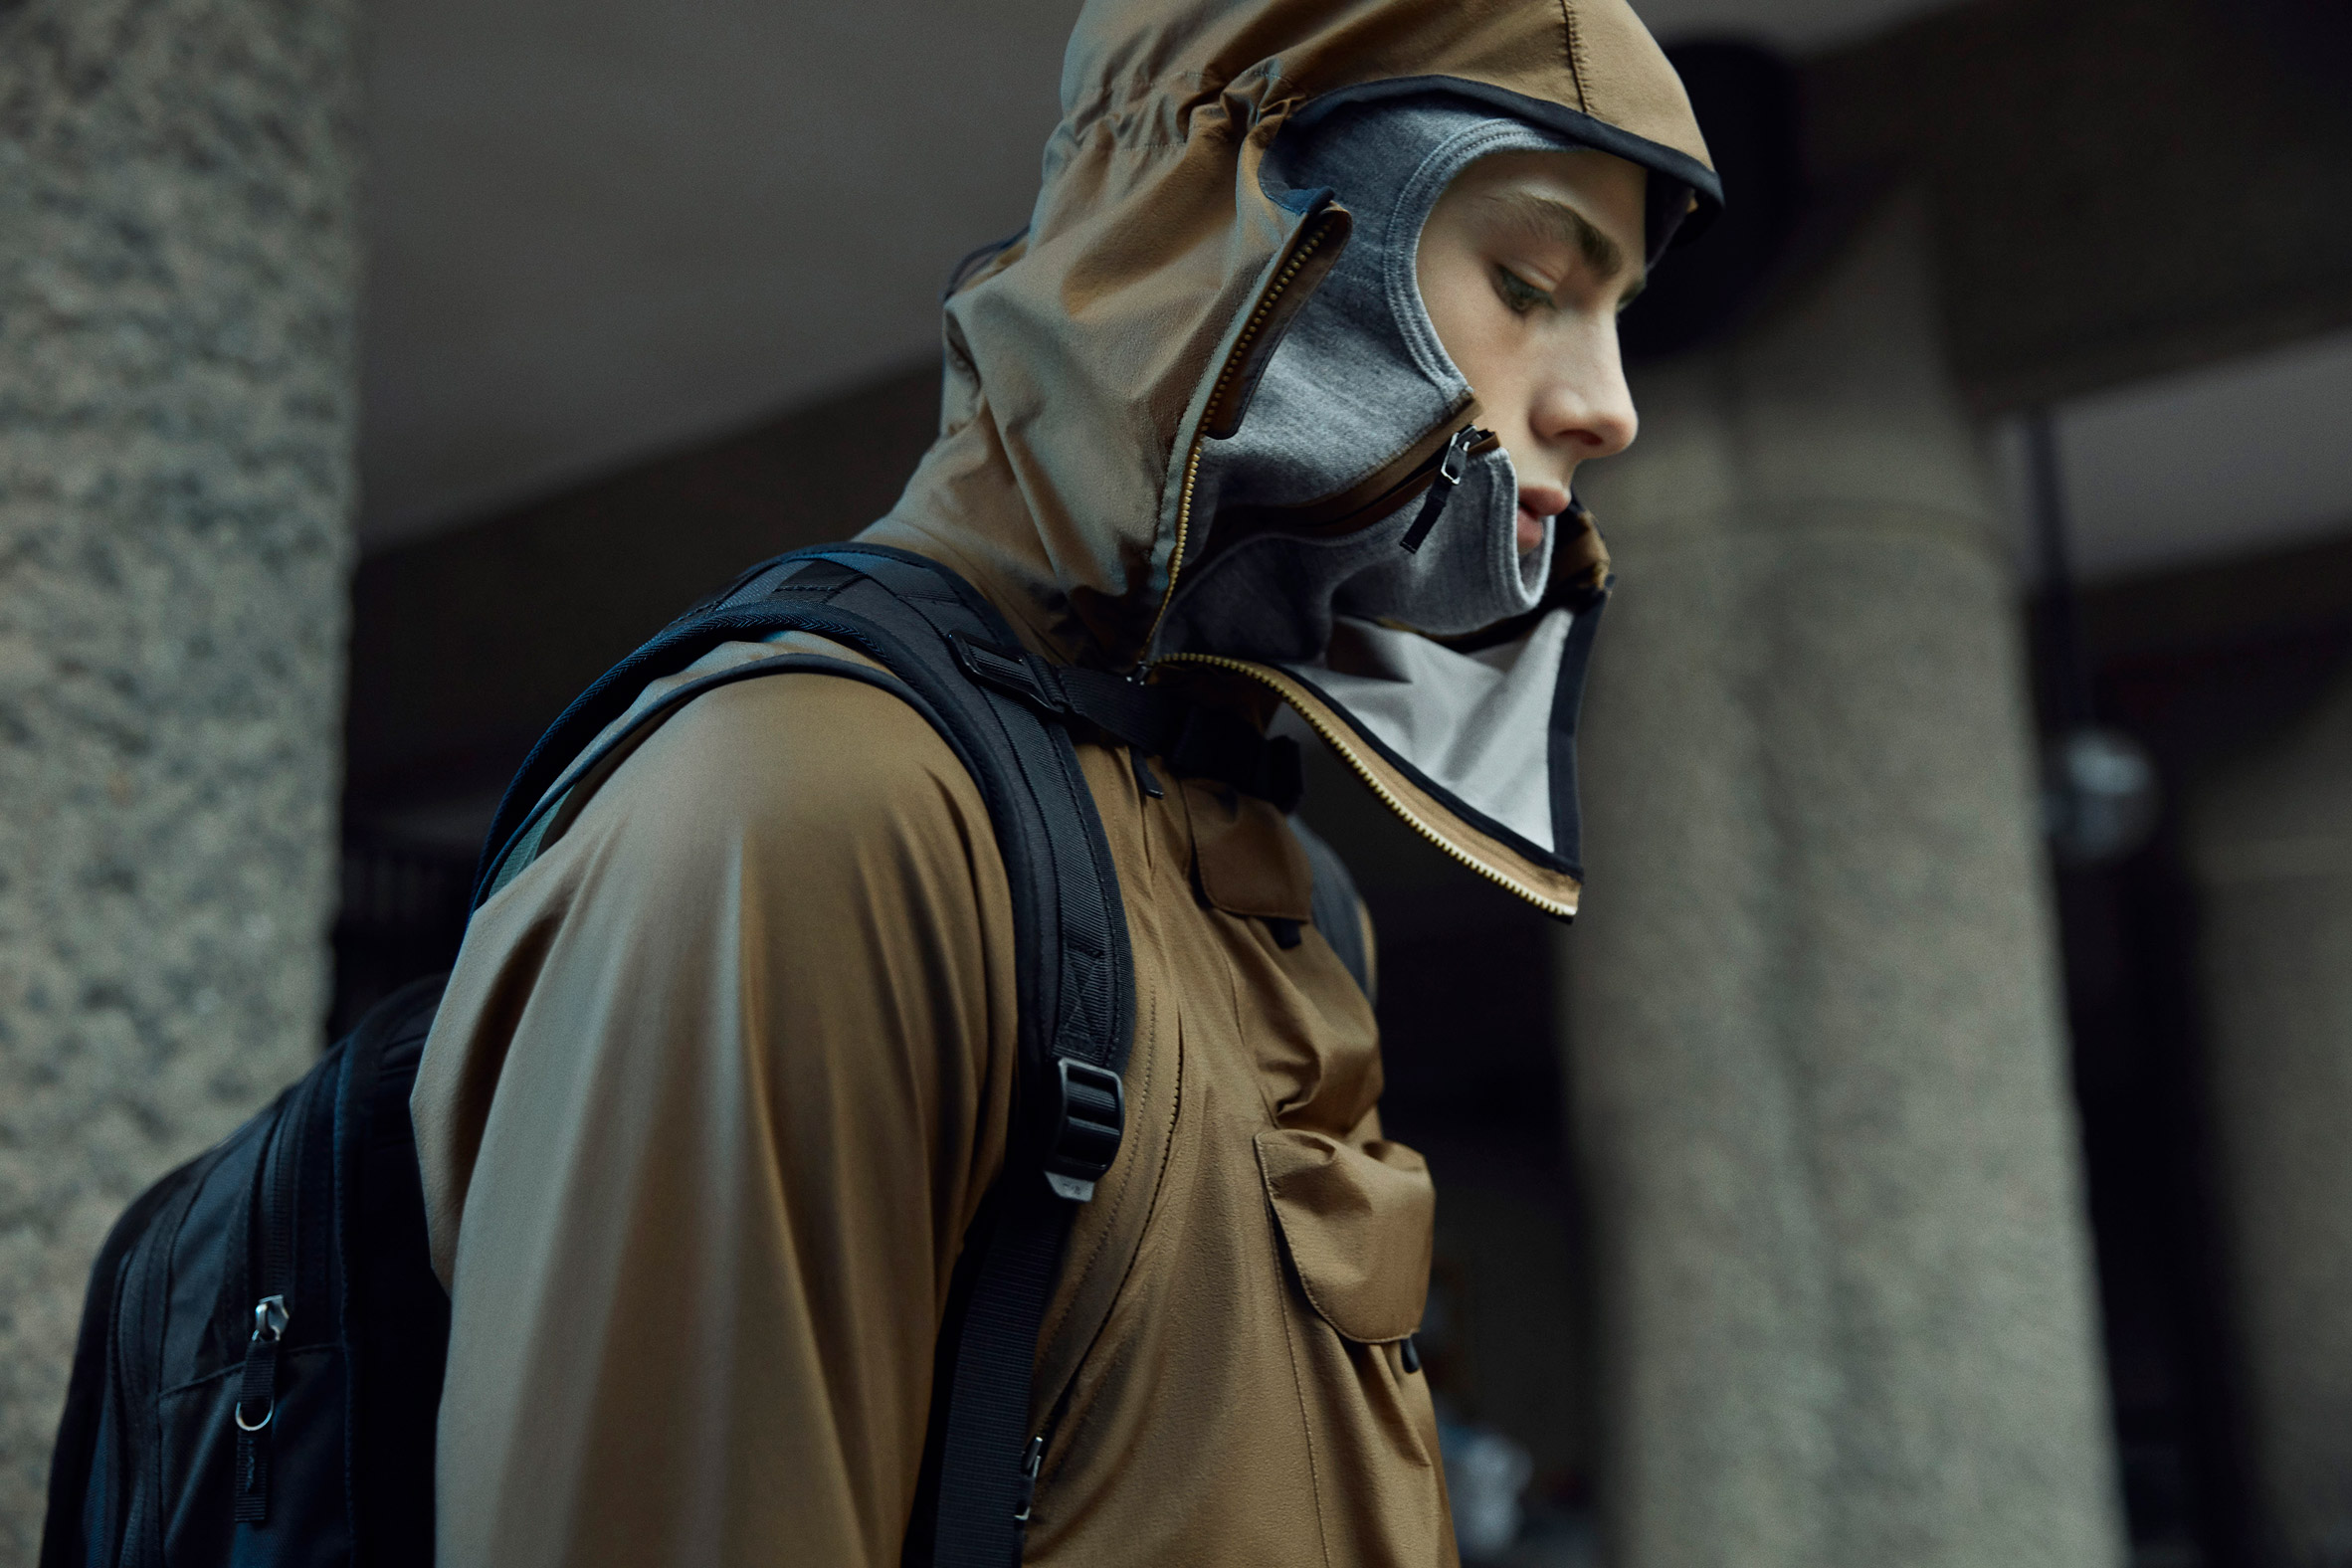 biografie Vijf chrysant Nike unveils Advanced Apparel Exploration collection designed by data